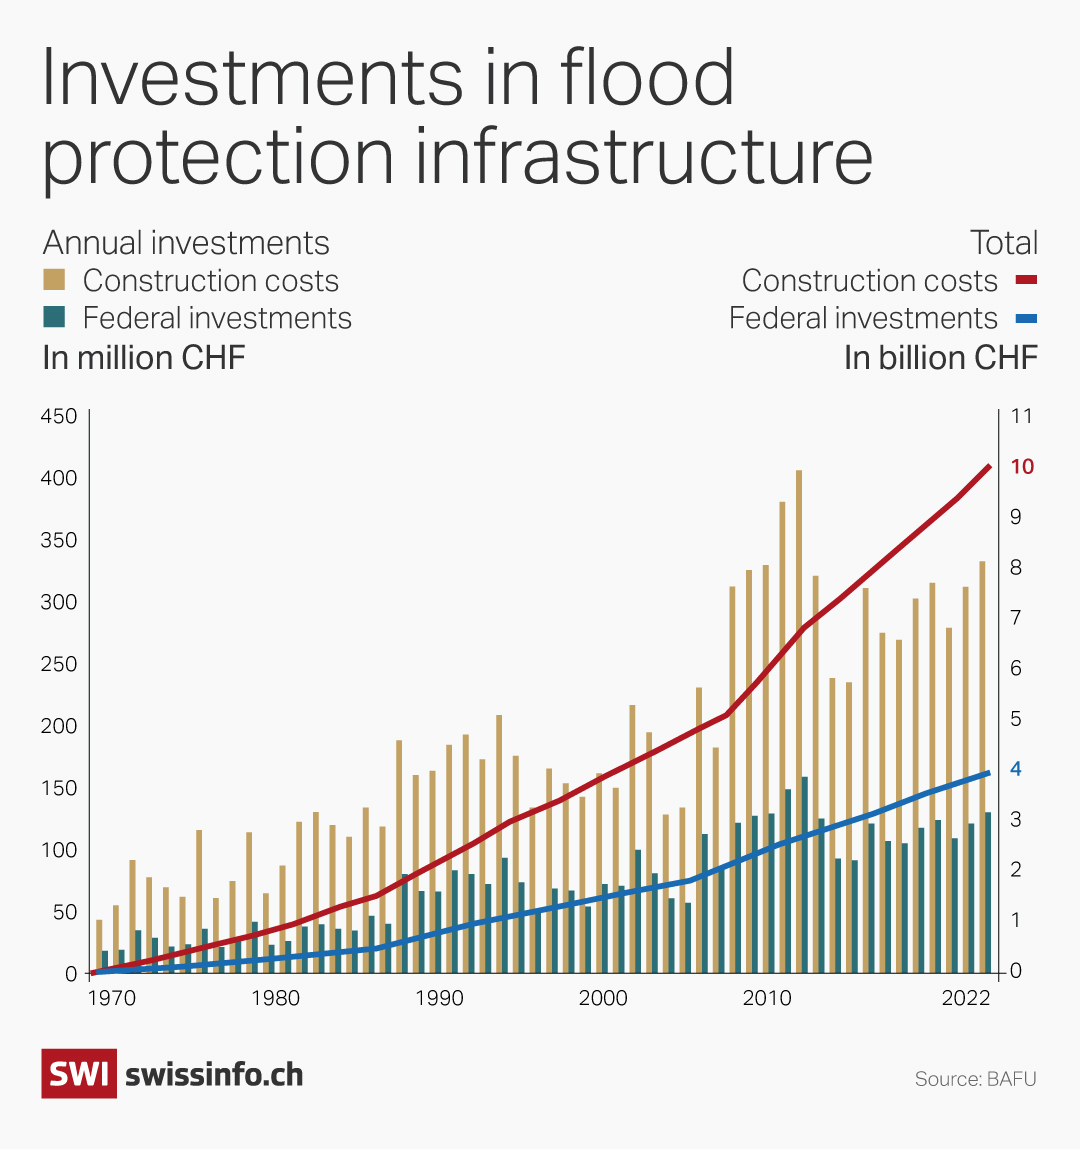 Switzerland's financial investment in flood protection infrastructure